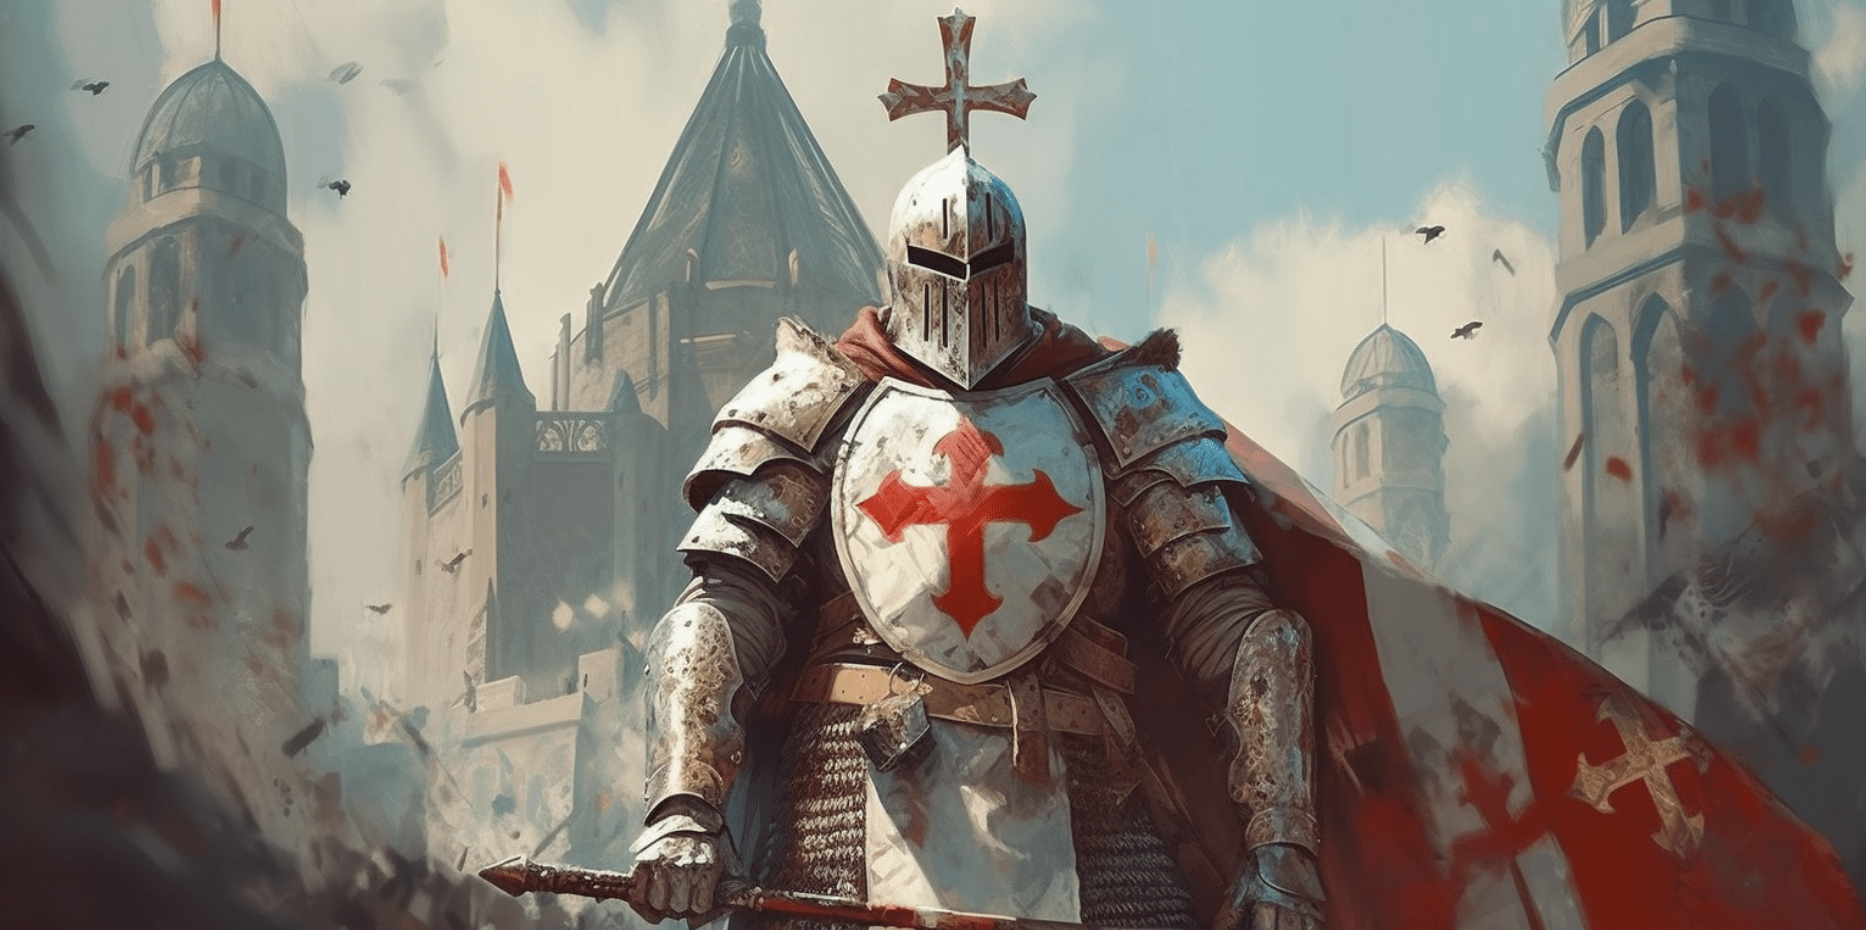 William of Chartres: The Grand Master of Knights Templar 